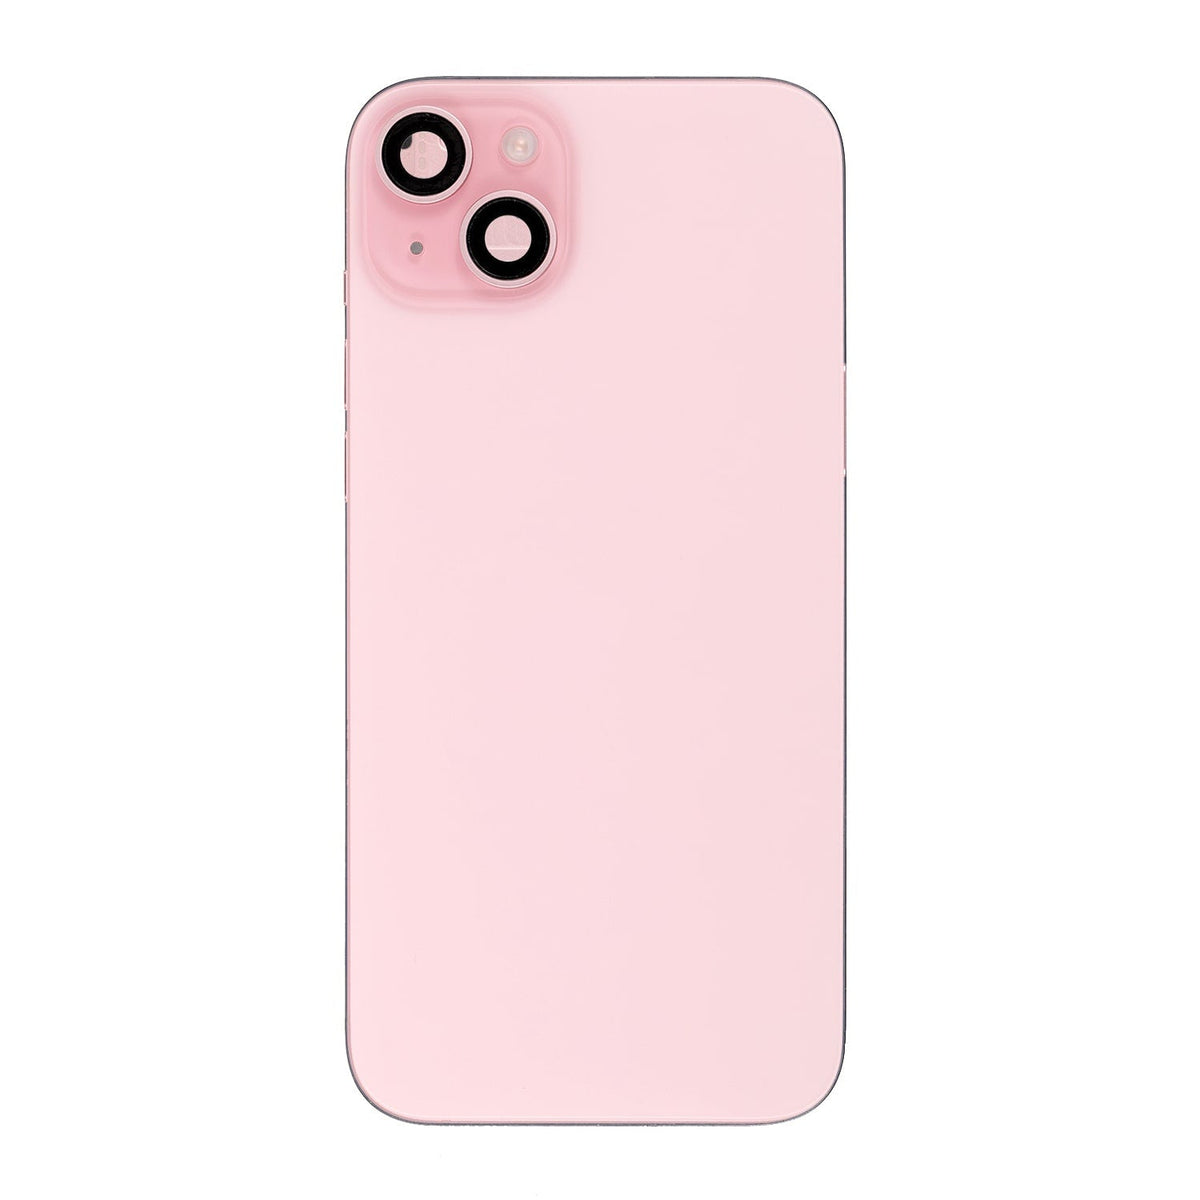 Replacement For iPhone 15 Plus Back Cover Full Assembly-Pink